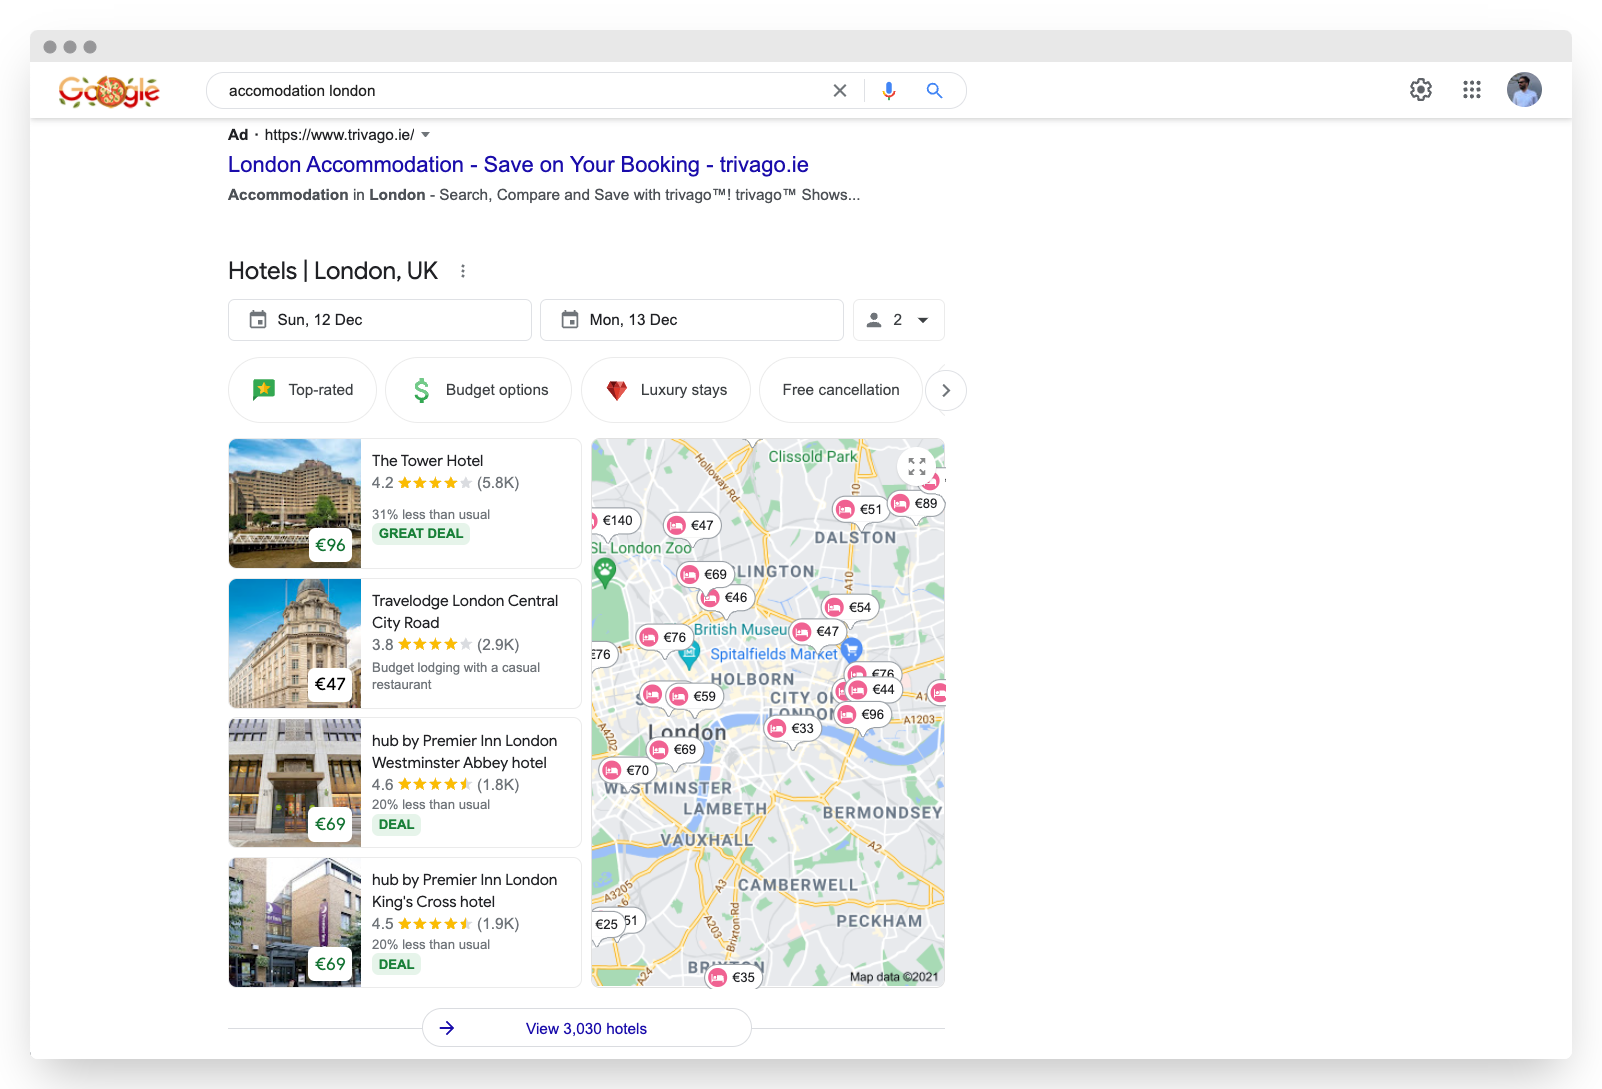 Accommodation widget displaying on the Google Search Results Page